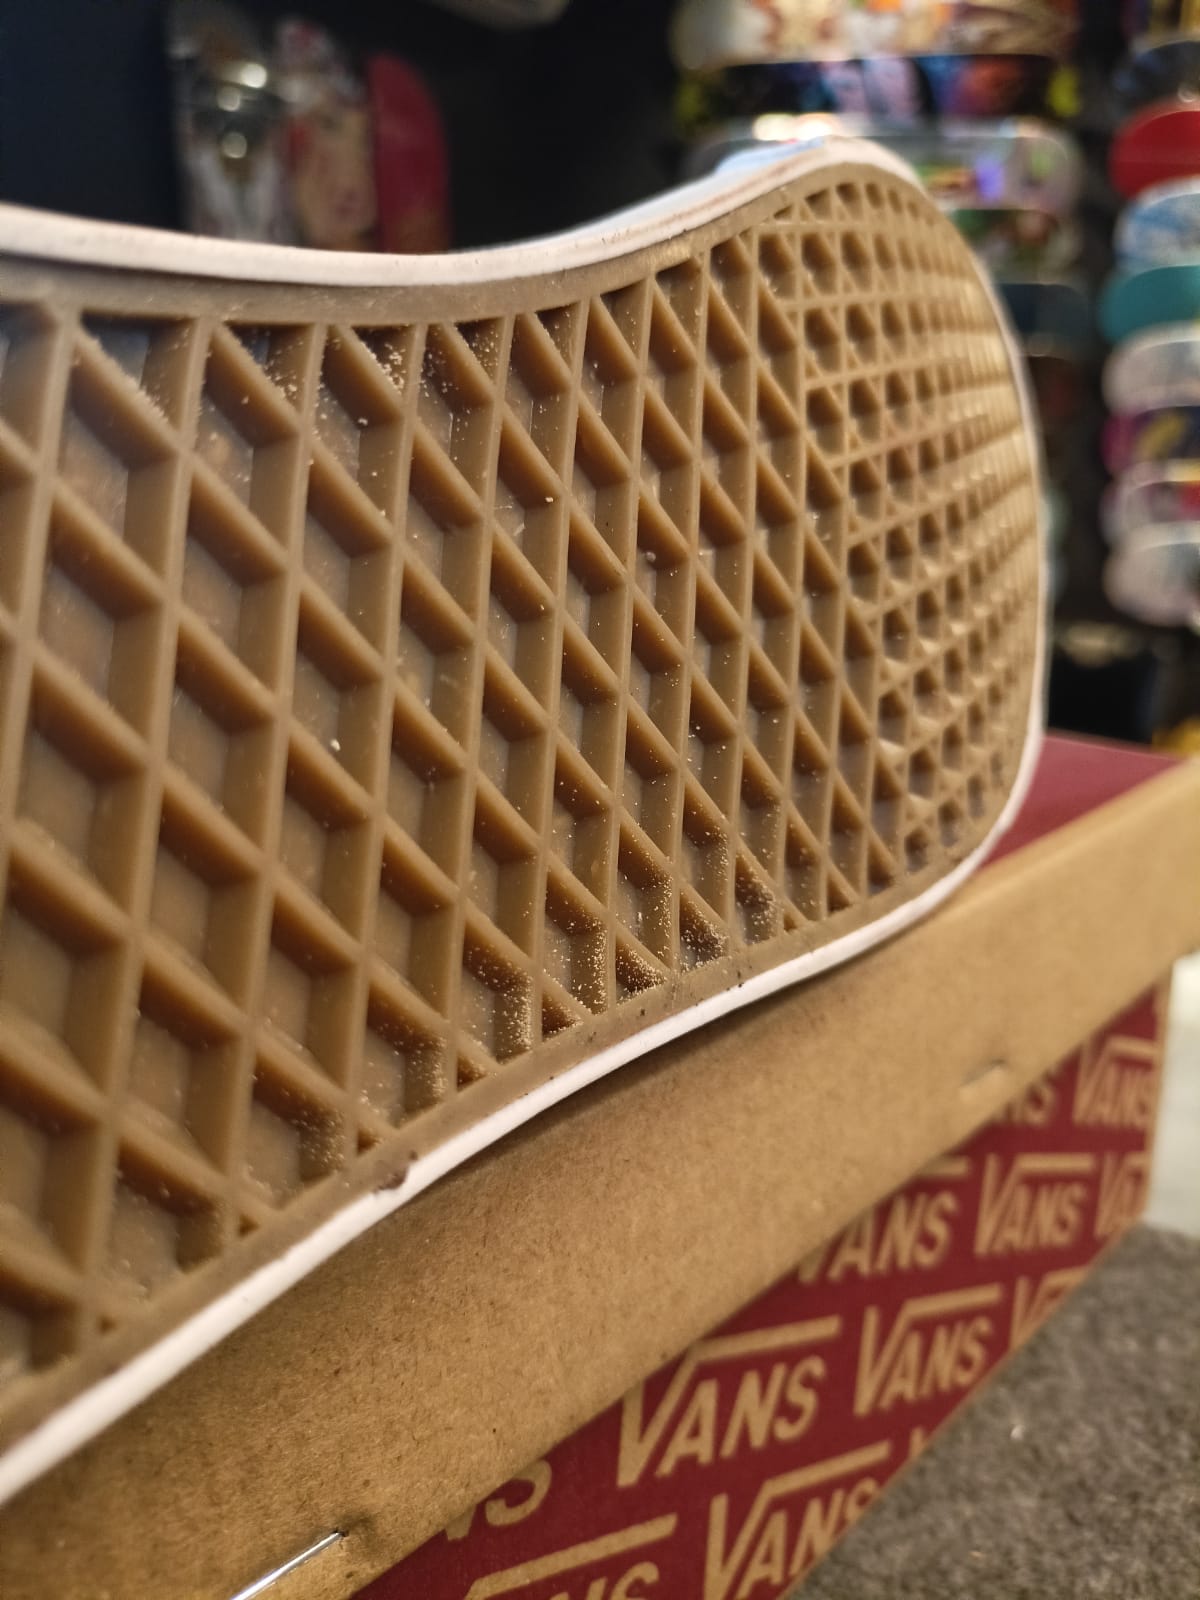 The Vans shoes' soles are made from rubber; therefore, you will have an excellent grip on the base.